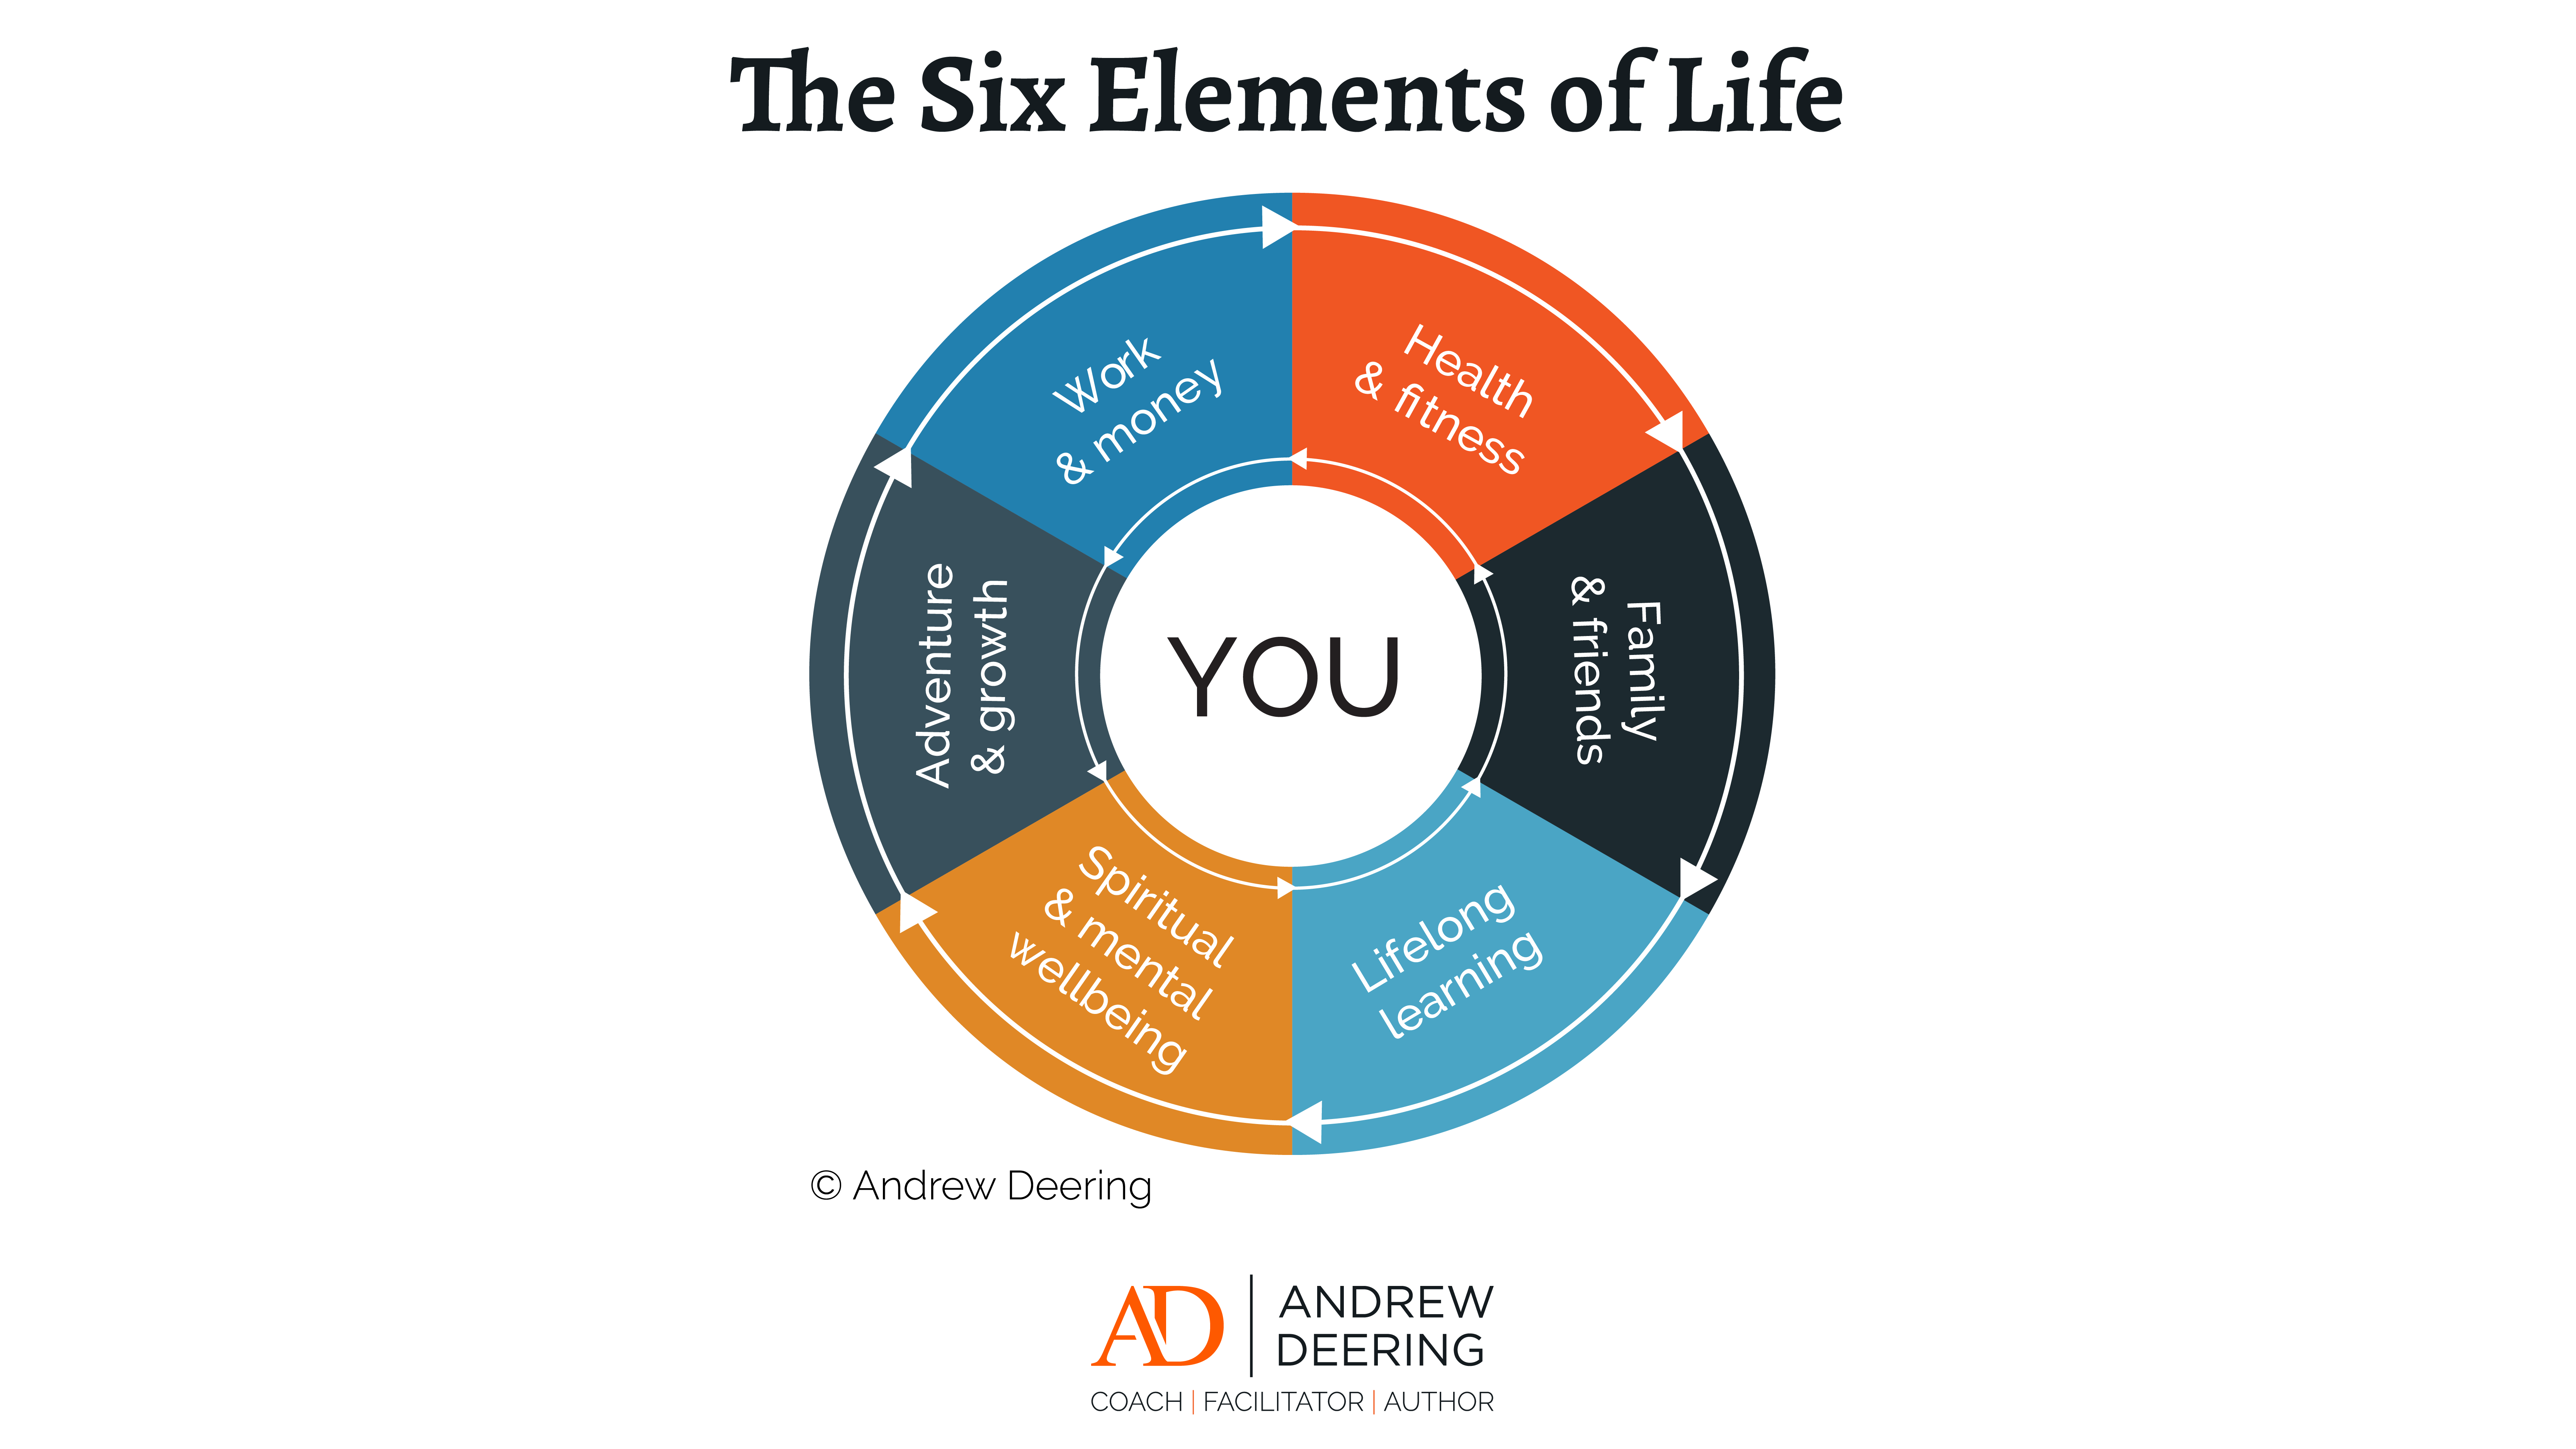 The siz elements of life model by Andre Deering, Coach, Mentor, Facilitator, Author